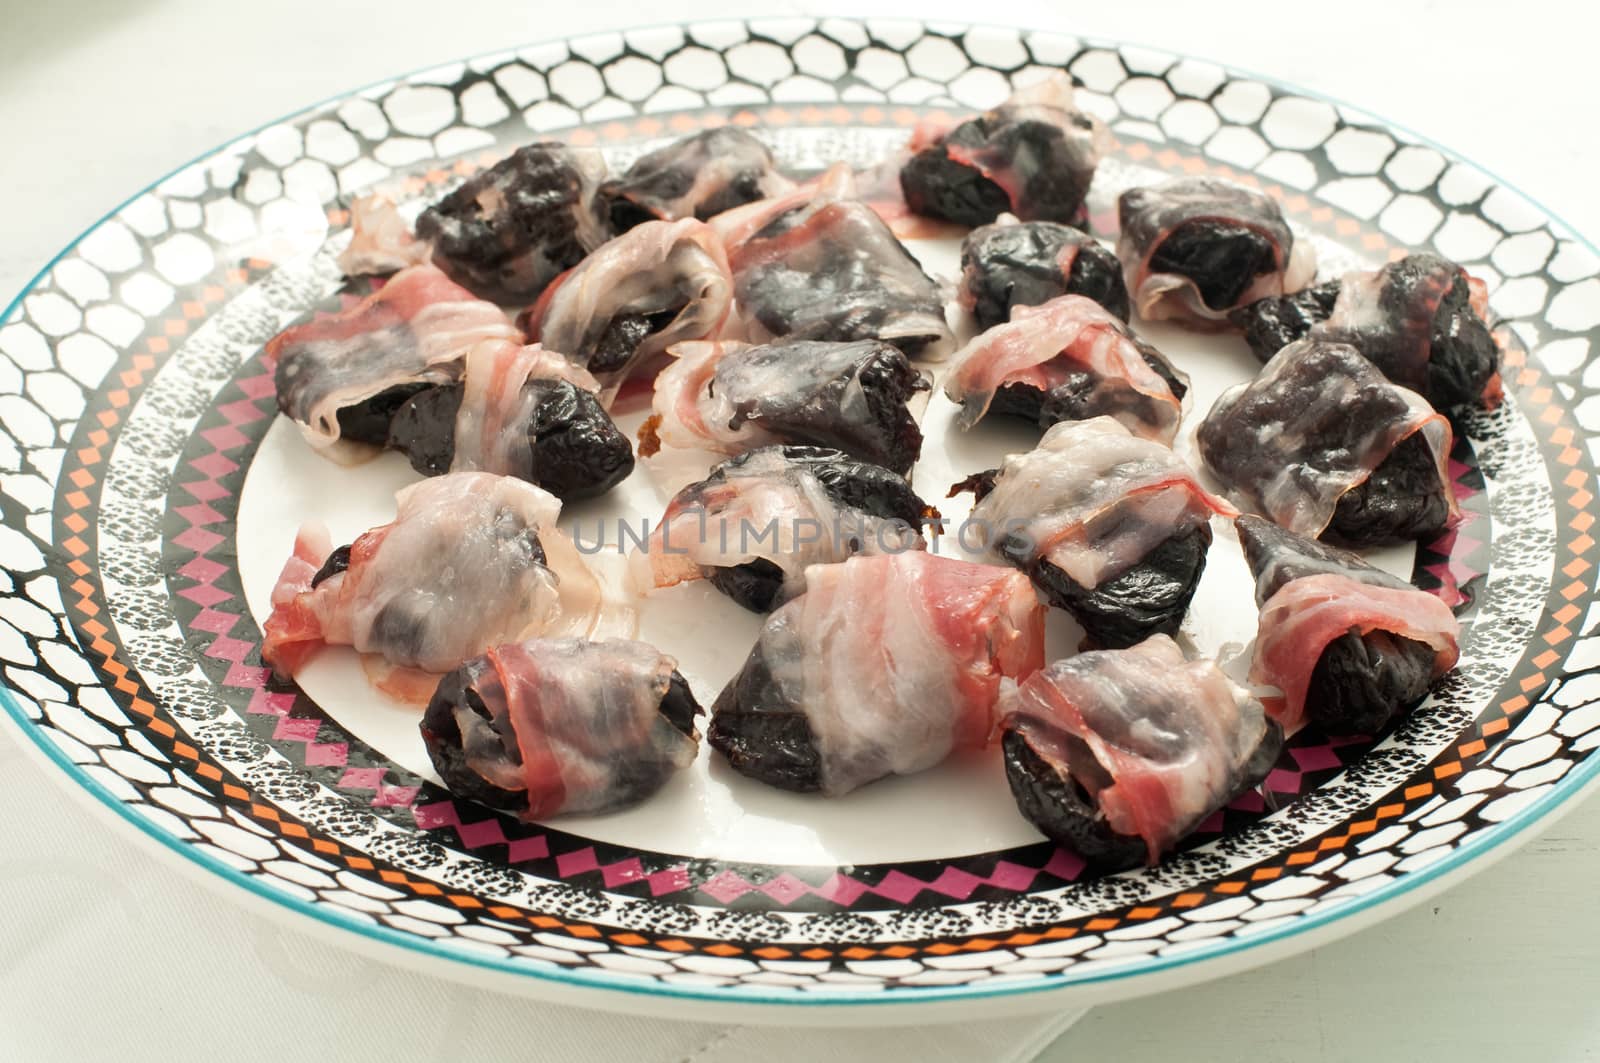 
Prunes wrapped in bacon and baked by gringox